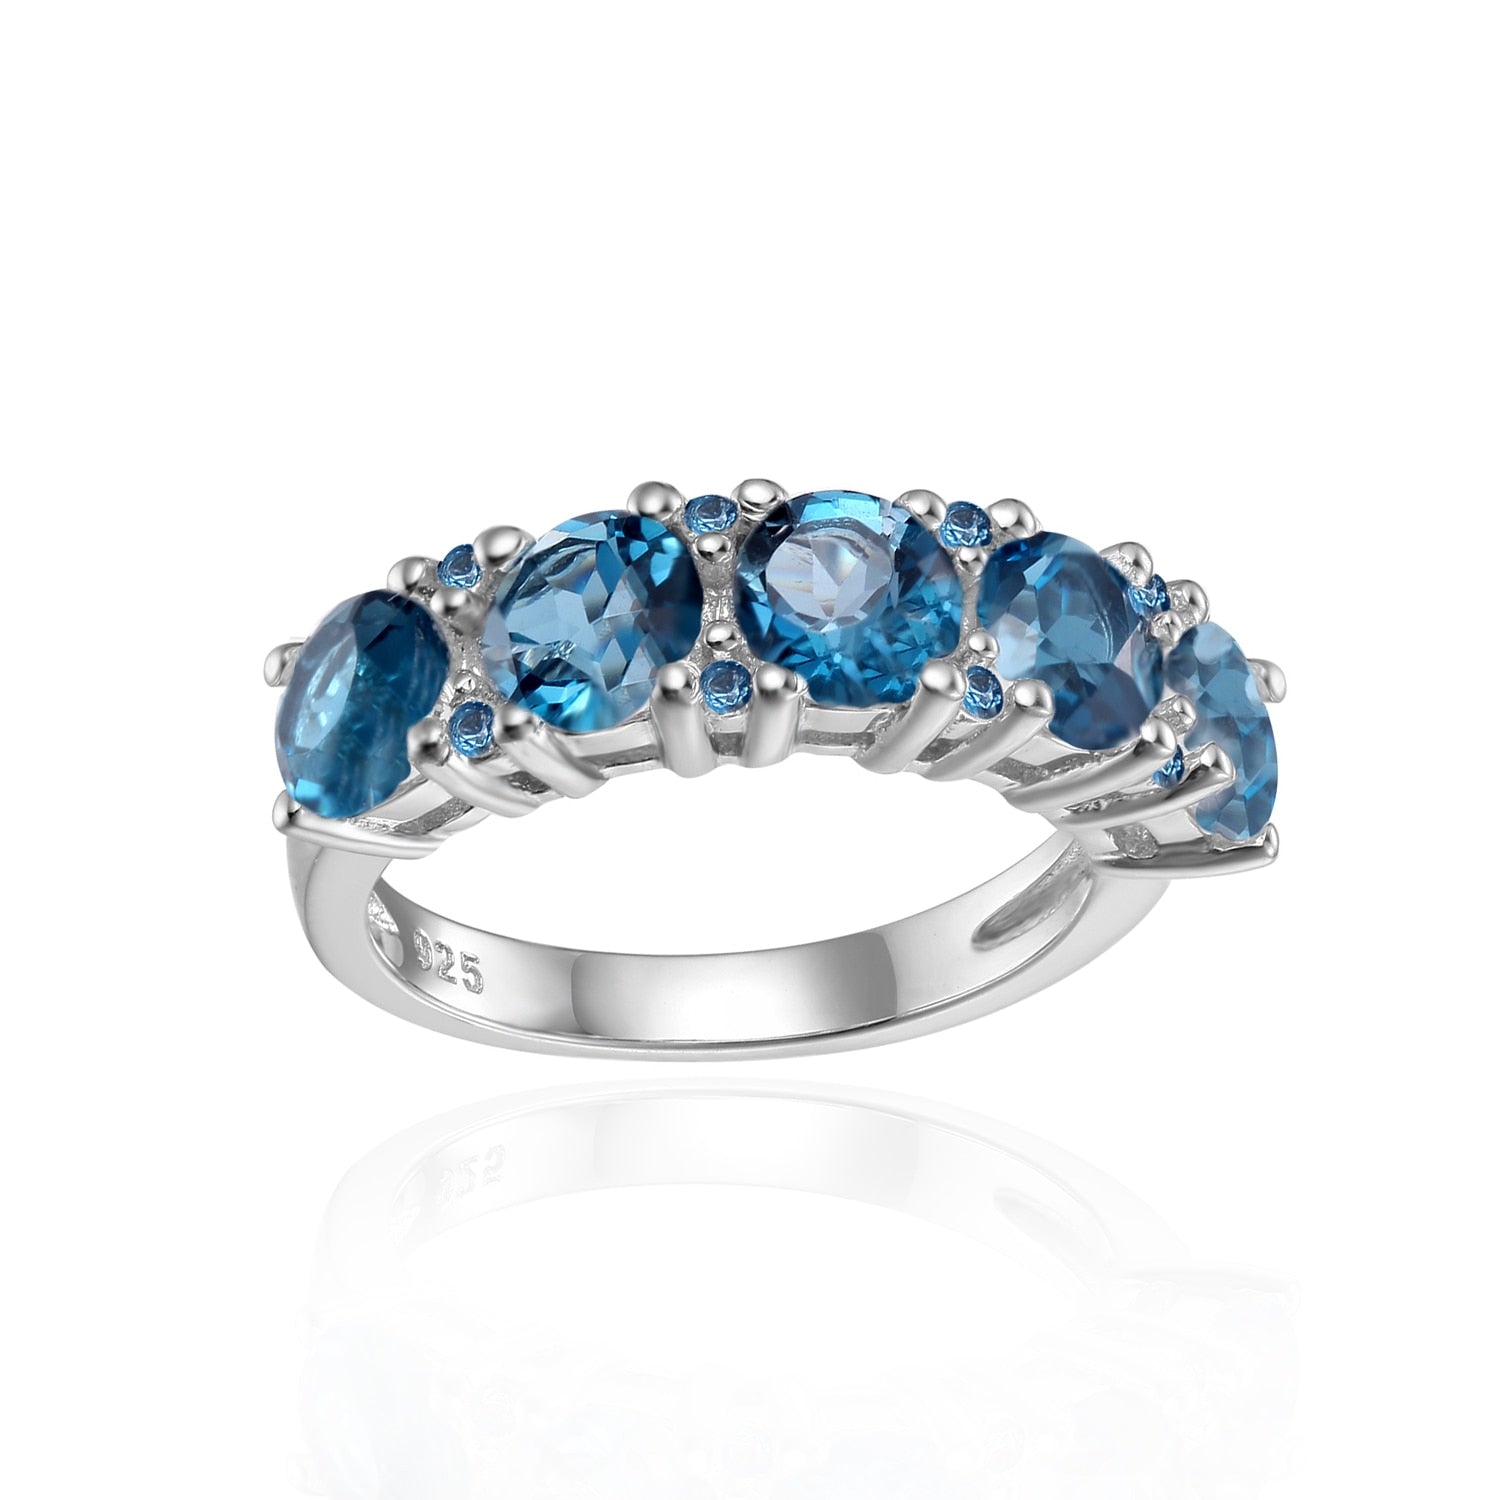 A silver ring set with five bluish green gems.